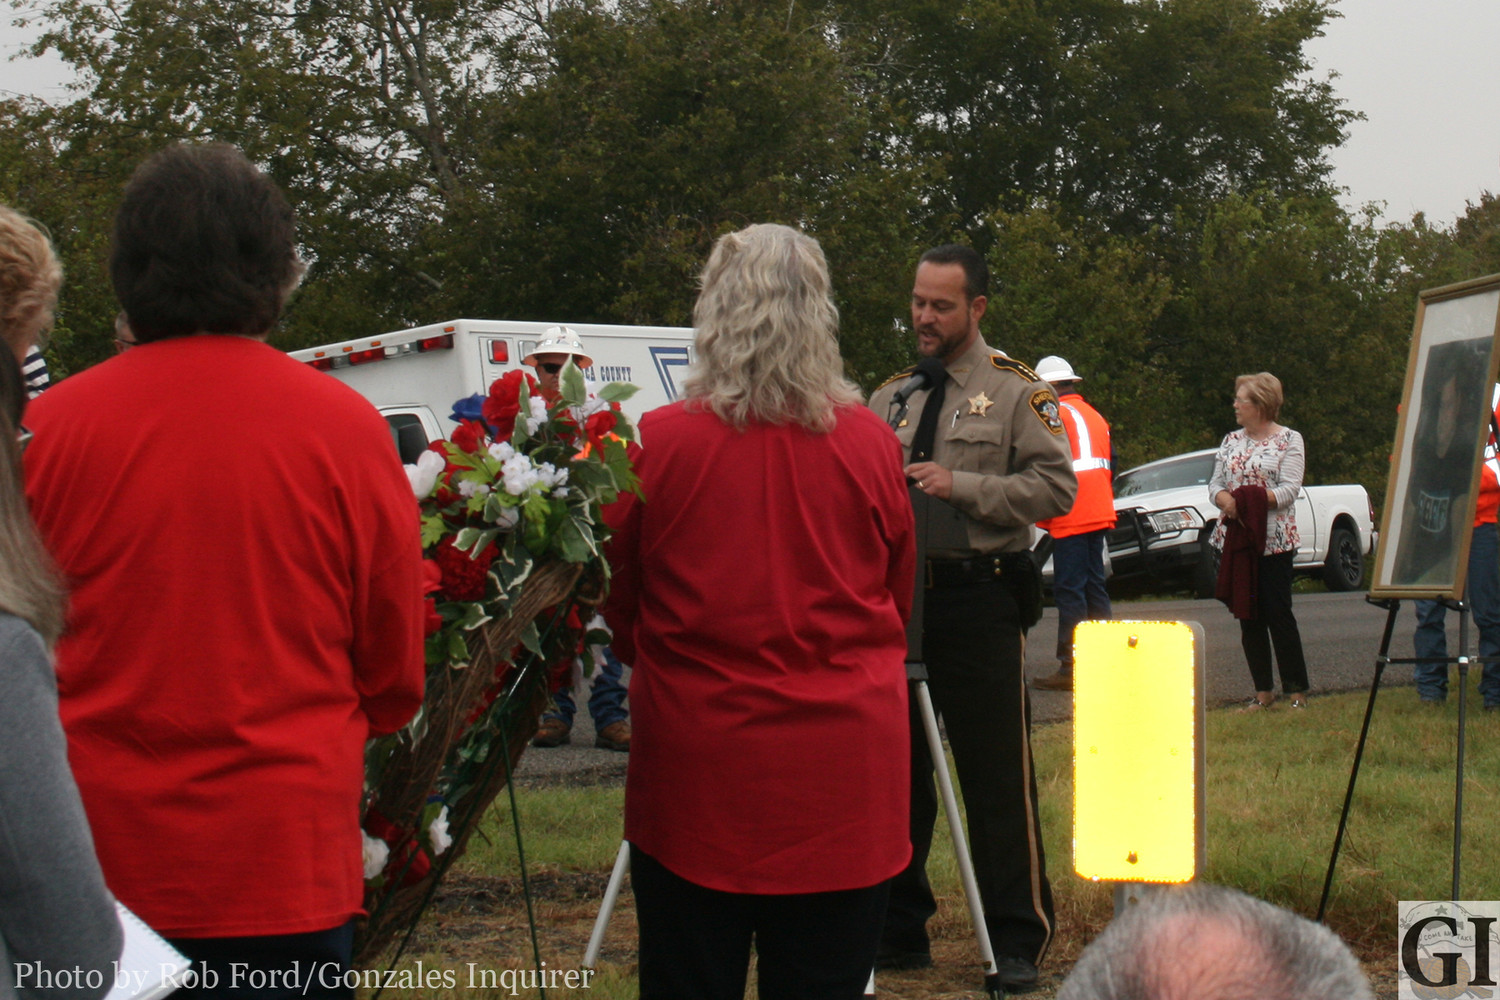 Gonzales County Sheriff Matt Atkinson spoke during a dedication renaming State Highway 95 in honor of fallen deputy Sgt. David M. Furrh, who was killed in the line of duty 17 years ago.